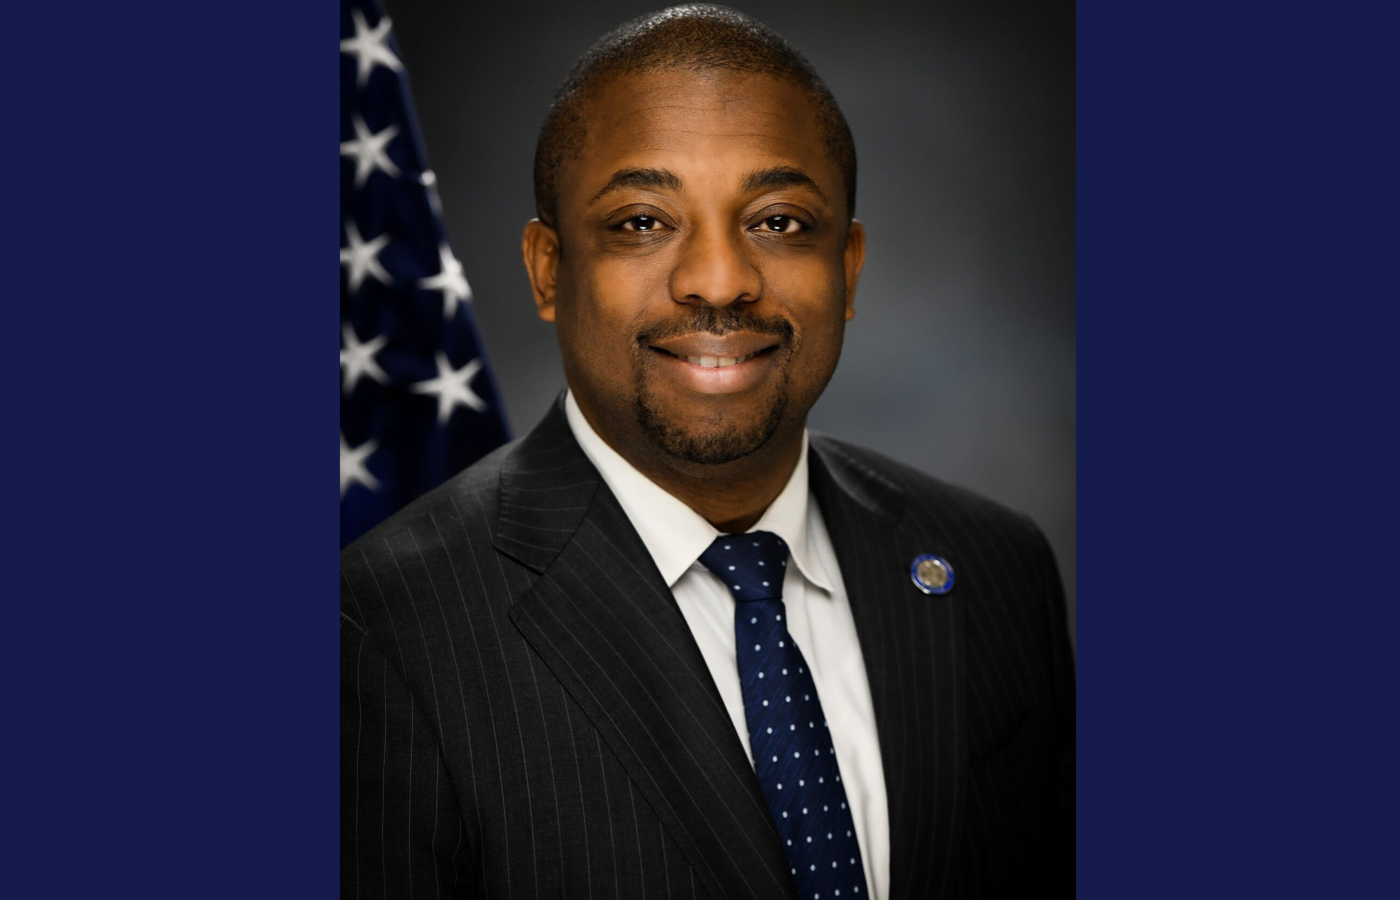 Current New York State Sen. Brian Benjamin, who is expected to be named Lieutenant Governor of New York.